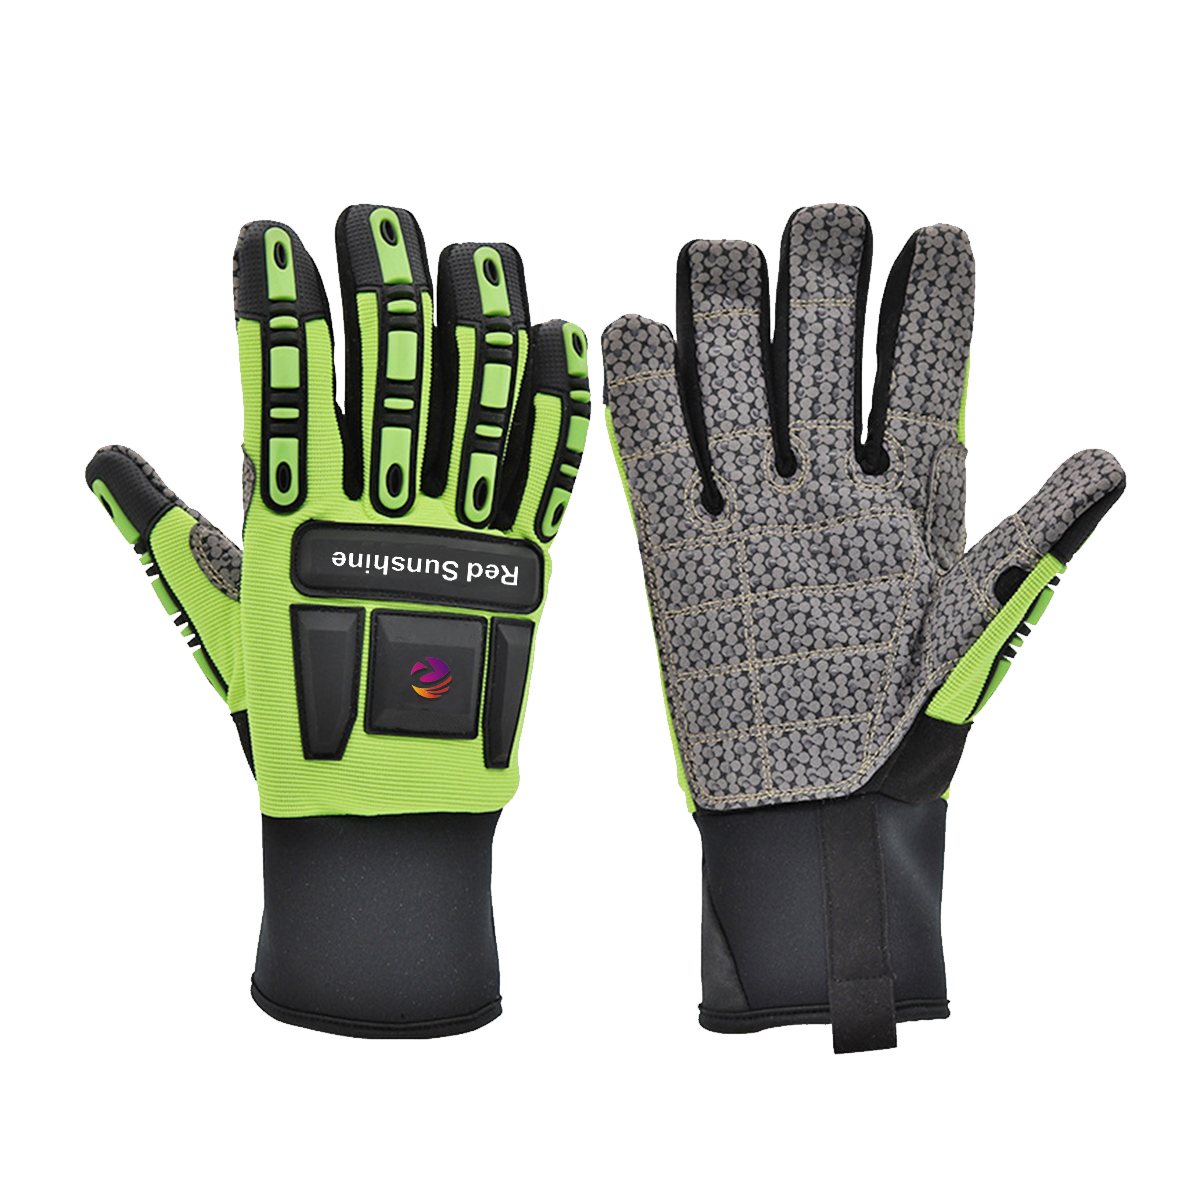 High quality Silicone Coated Palm Impact resistant Gloves TPR Work Mechanic Safety Gloves oil and gas gloves